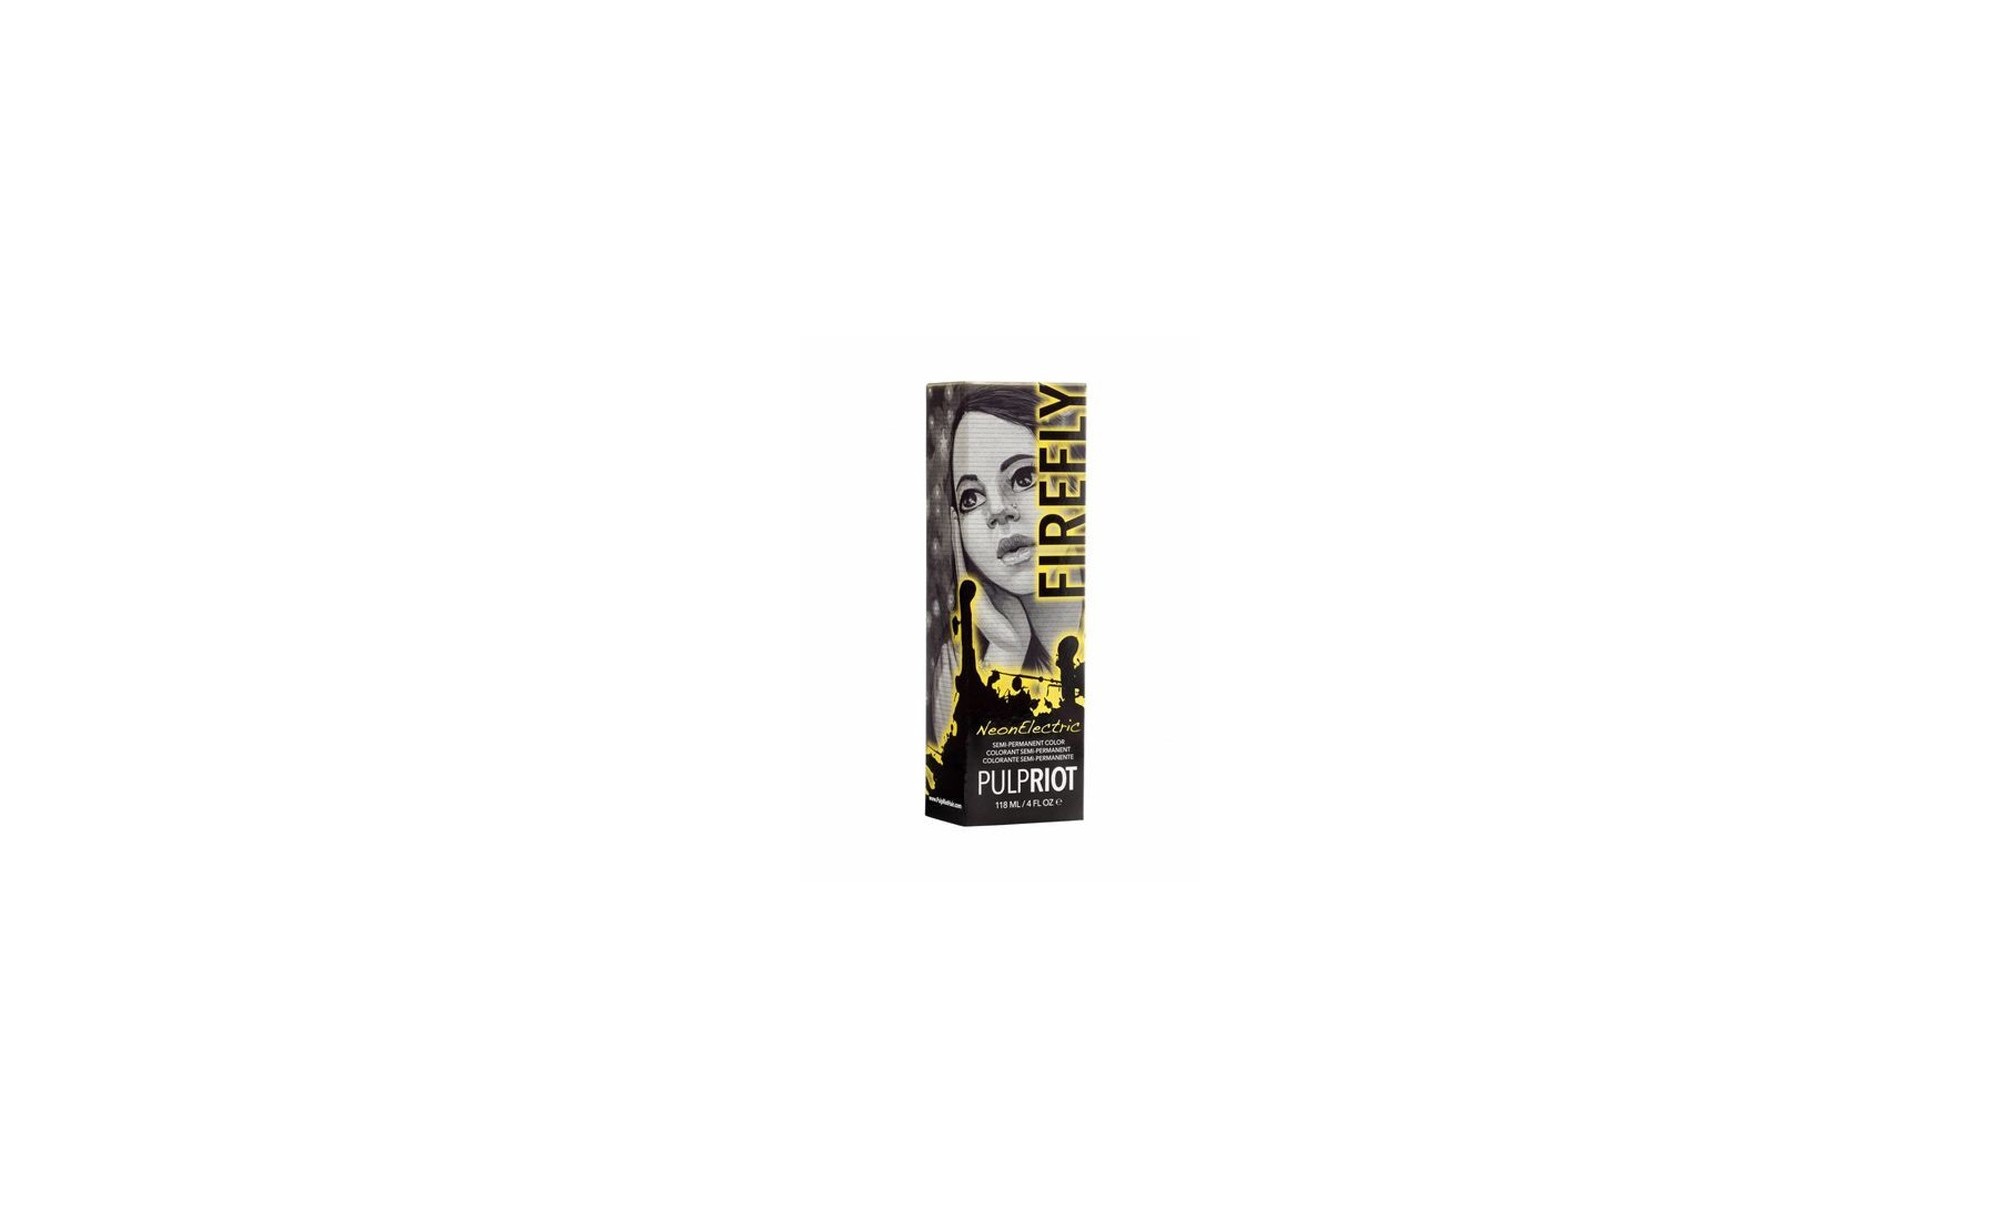 Pulp Riot Haircolor Firefly 118 ml